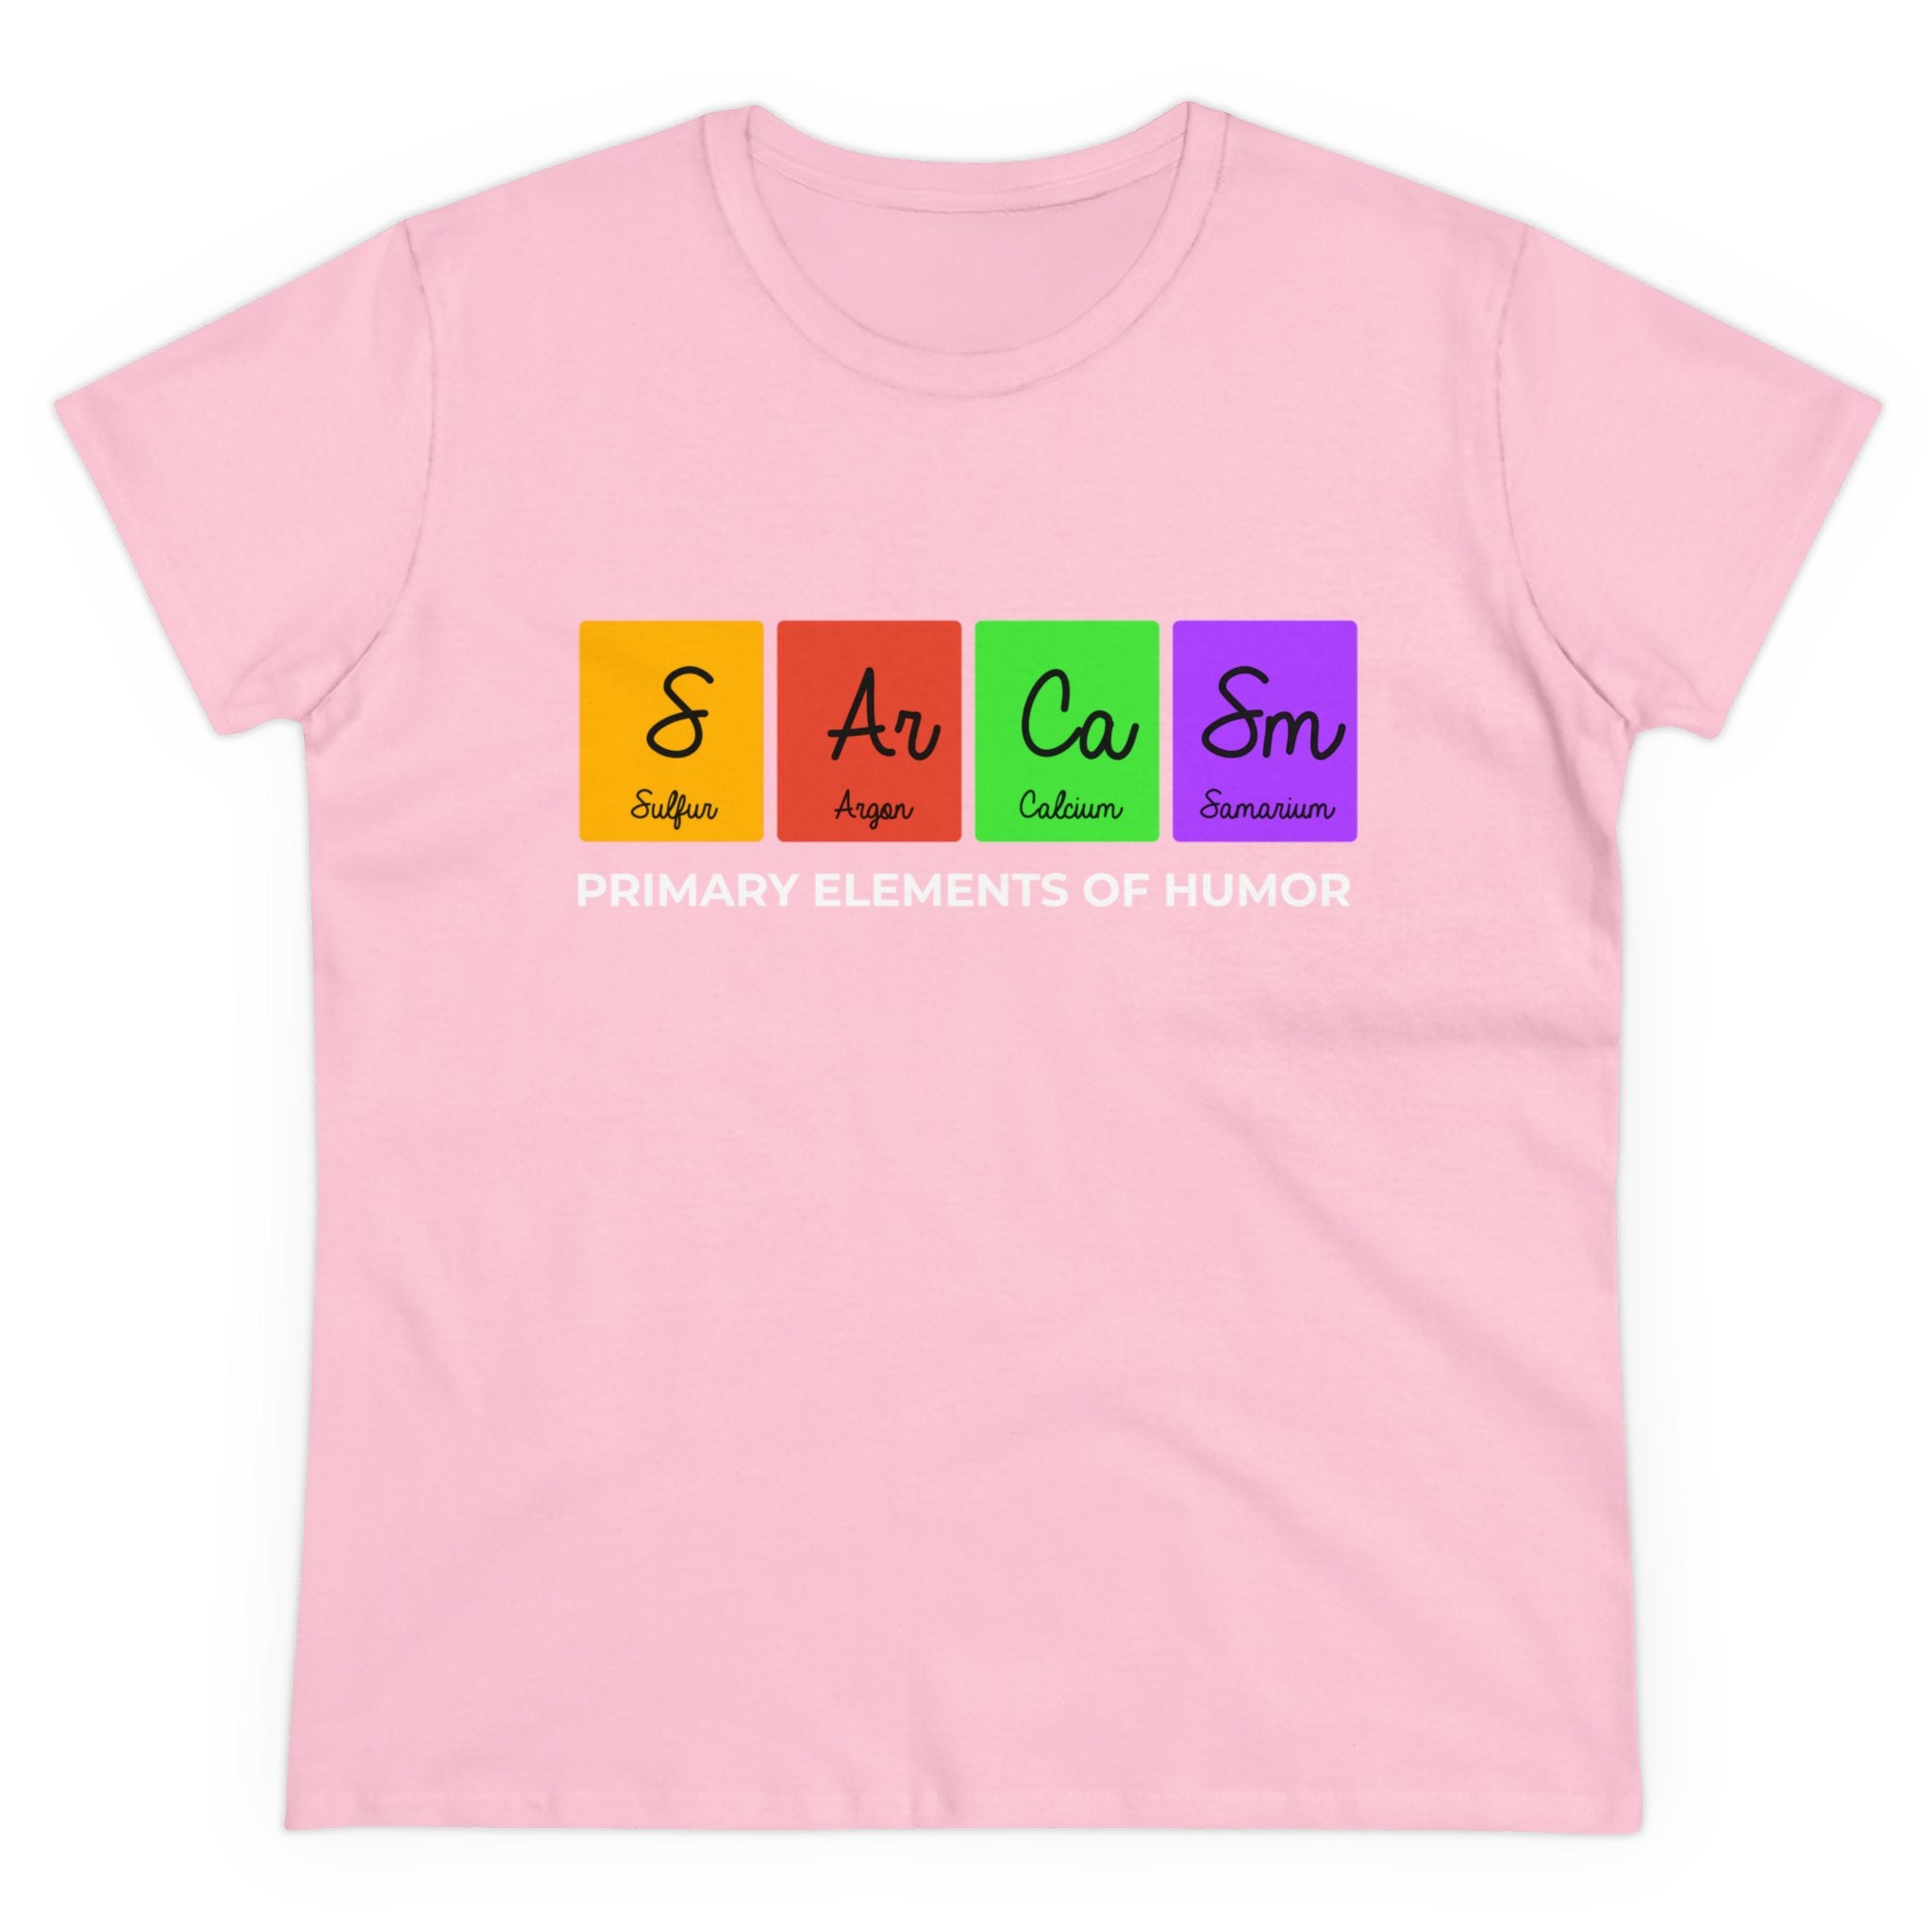 This cozy S-Ar-Ca-Sm - Women's Tee features a pink design with the text "Primary Elements of Humor" below four periodic table elements: Sulfur (S), Argon (Ar), Calcium (Ca), and Samarium (Sm). Perfect for those who love science and a good laugh.